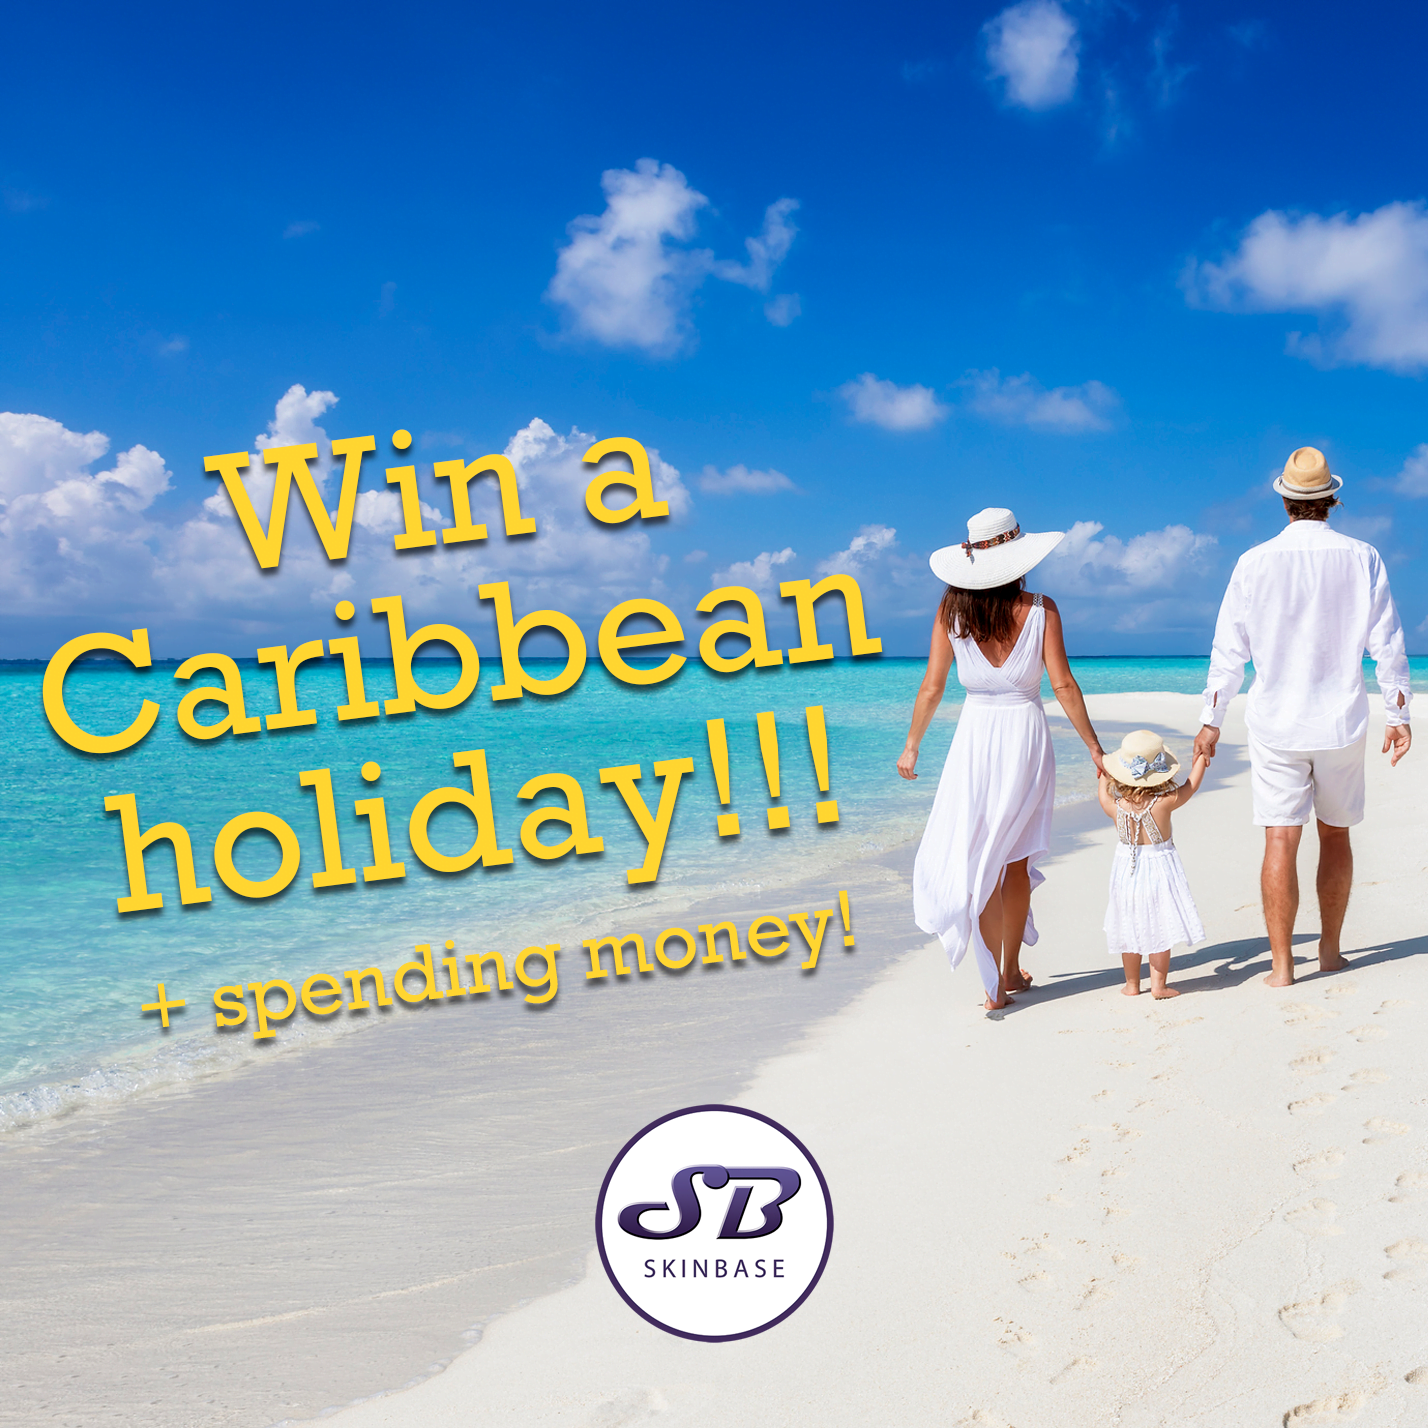 win a holiday